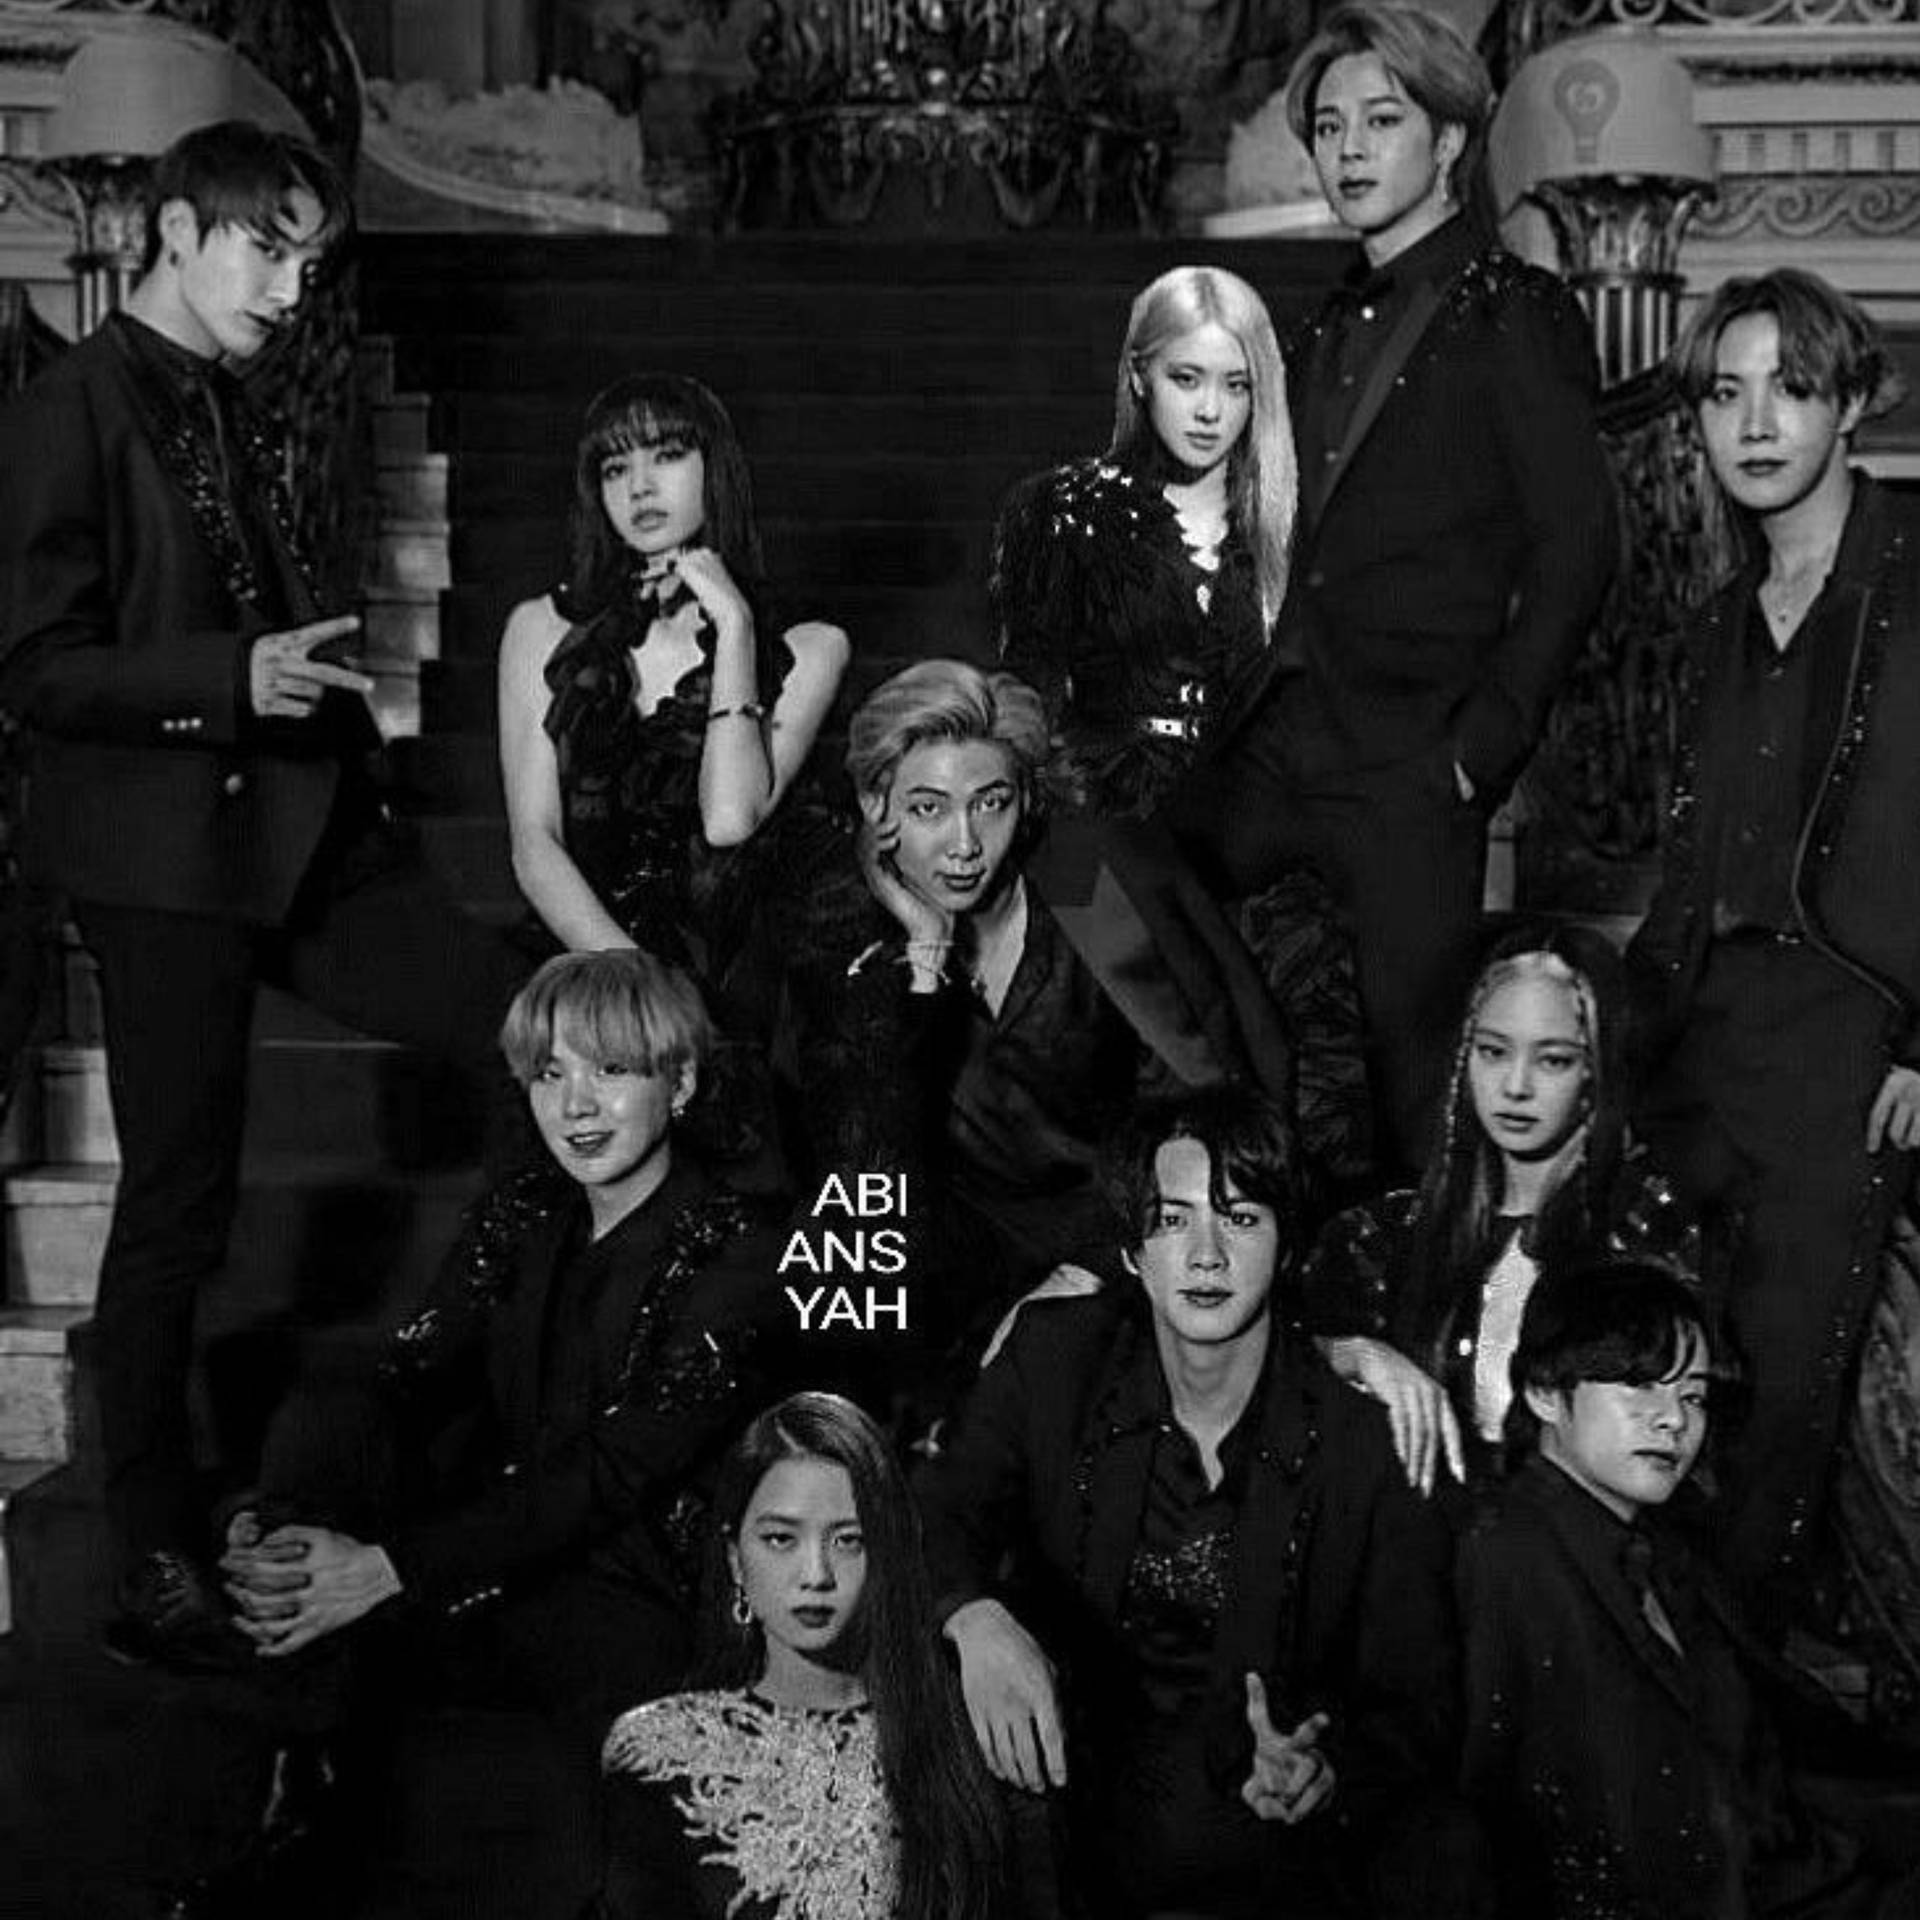 Bts And Blackpink In Grand Staircase Wallpaper